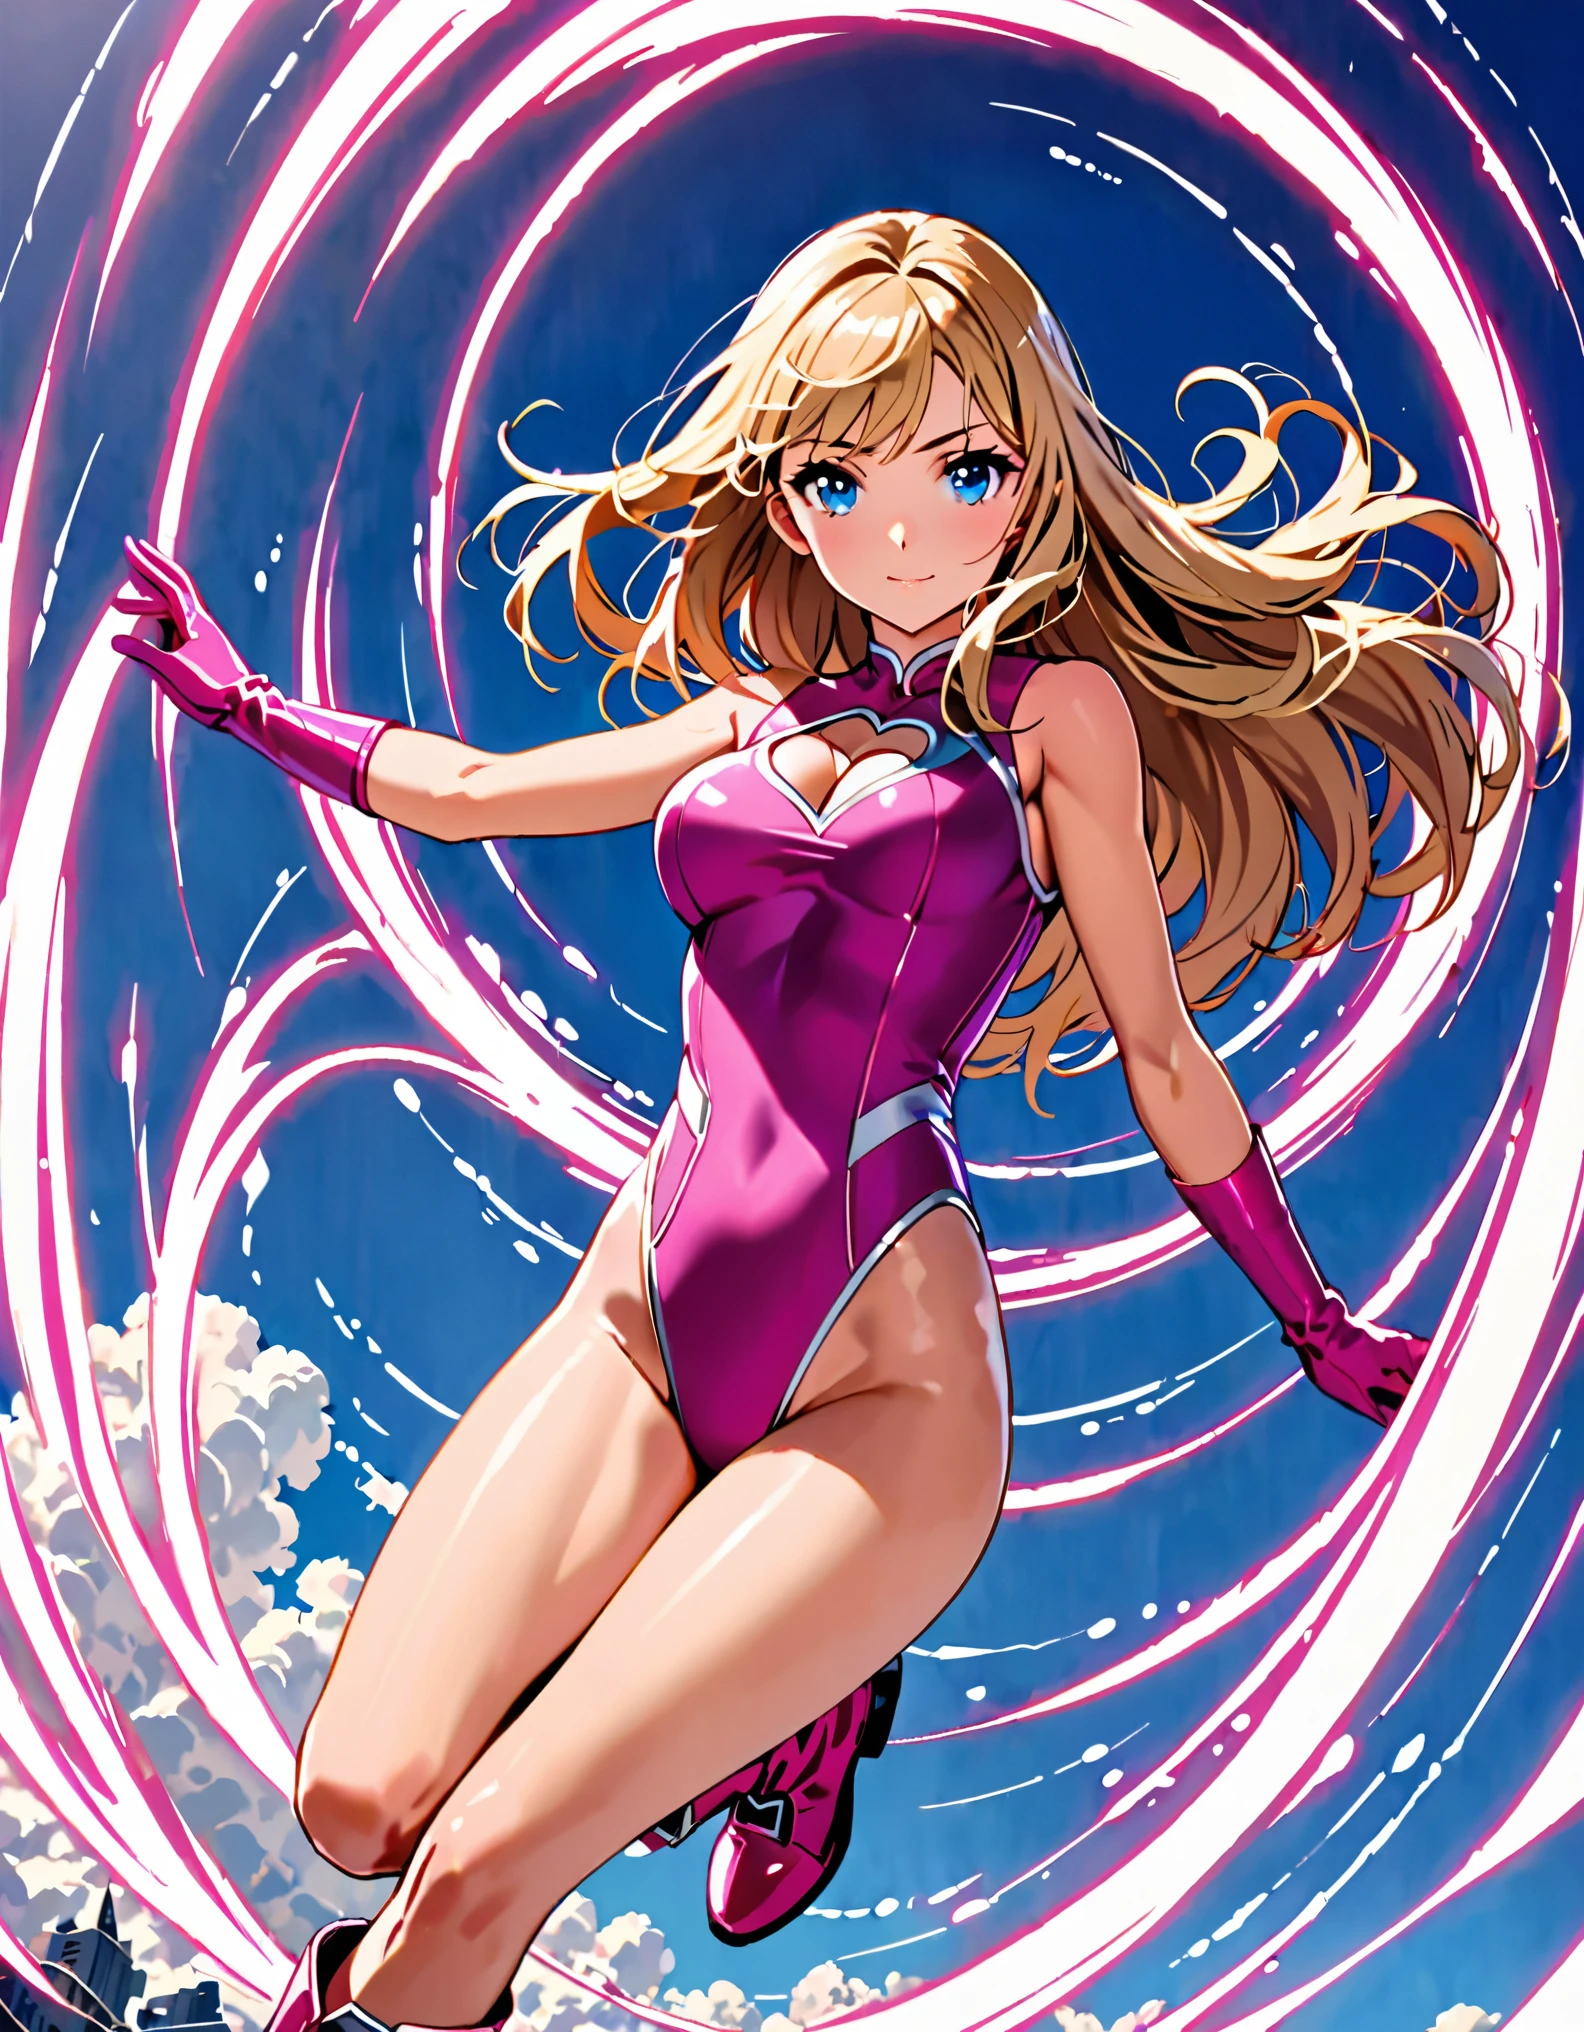 ((masterpiece)), ((best quality)), ((high res)), 1girl, solo, solo focus, (leotard, perfect leotard, pink leotard, sleeveless, bare legs), matching boots, looking at the viewer, blue sky backdrop, perfect hands, complete fingers, perfect anatomy, medium breasts, (blonde hair, long hair, mid-length hair, hair down, bangs), knee boots, blue eyes, beautiful detailed eyes, beautiful detailed face, cute face, (cleavage heart cutout), pink gloves, pink footwear, superhero, heroic, spread arms. spins in place like a tornado, she spins at an incredible speed, creating a whirlwind of air around her,spiral lines around,cyclone winds around,tornado spinning.